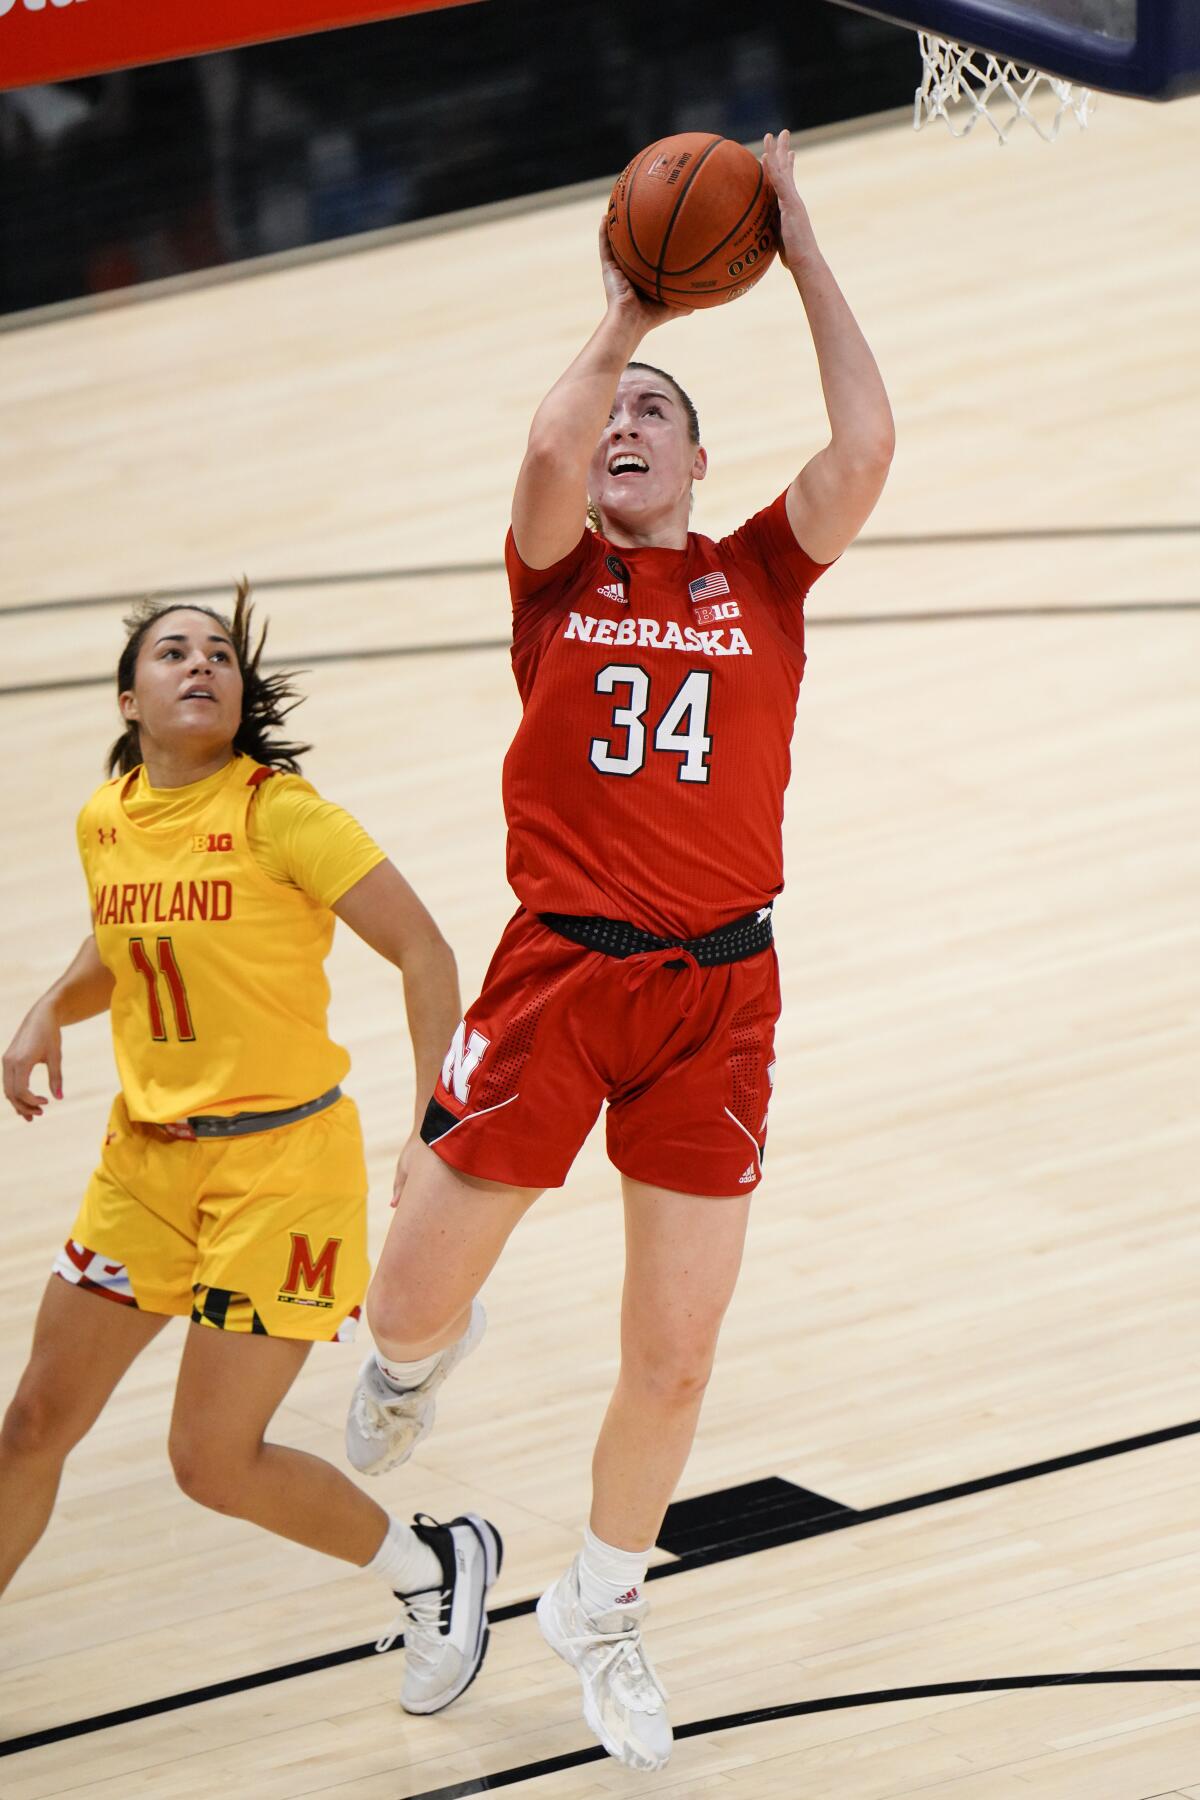 Nebraska forward Isabelle Bourne (34) shoots in front of Maryland guard Katie Benzan (11) in the second half of an NCAA college basketball game in the quarterfinals of the Big Ten Conference tournament in Indianapolis, Thursday, March 11, 2021. Maryland won 83-73. (AP Photo/AJ Mast)